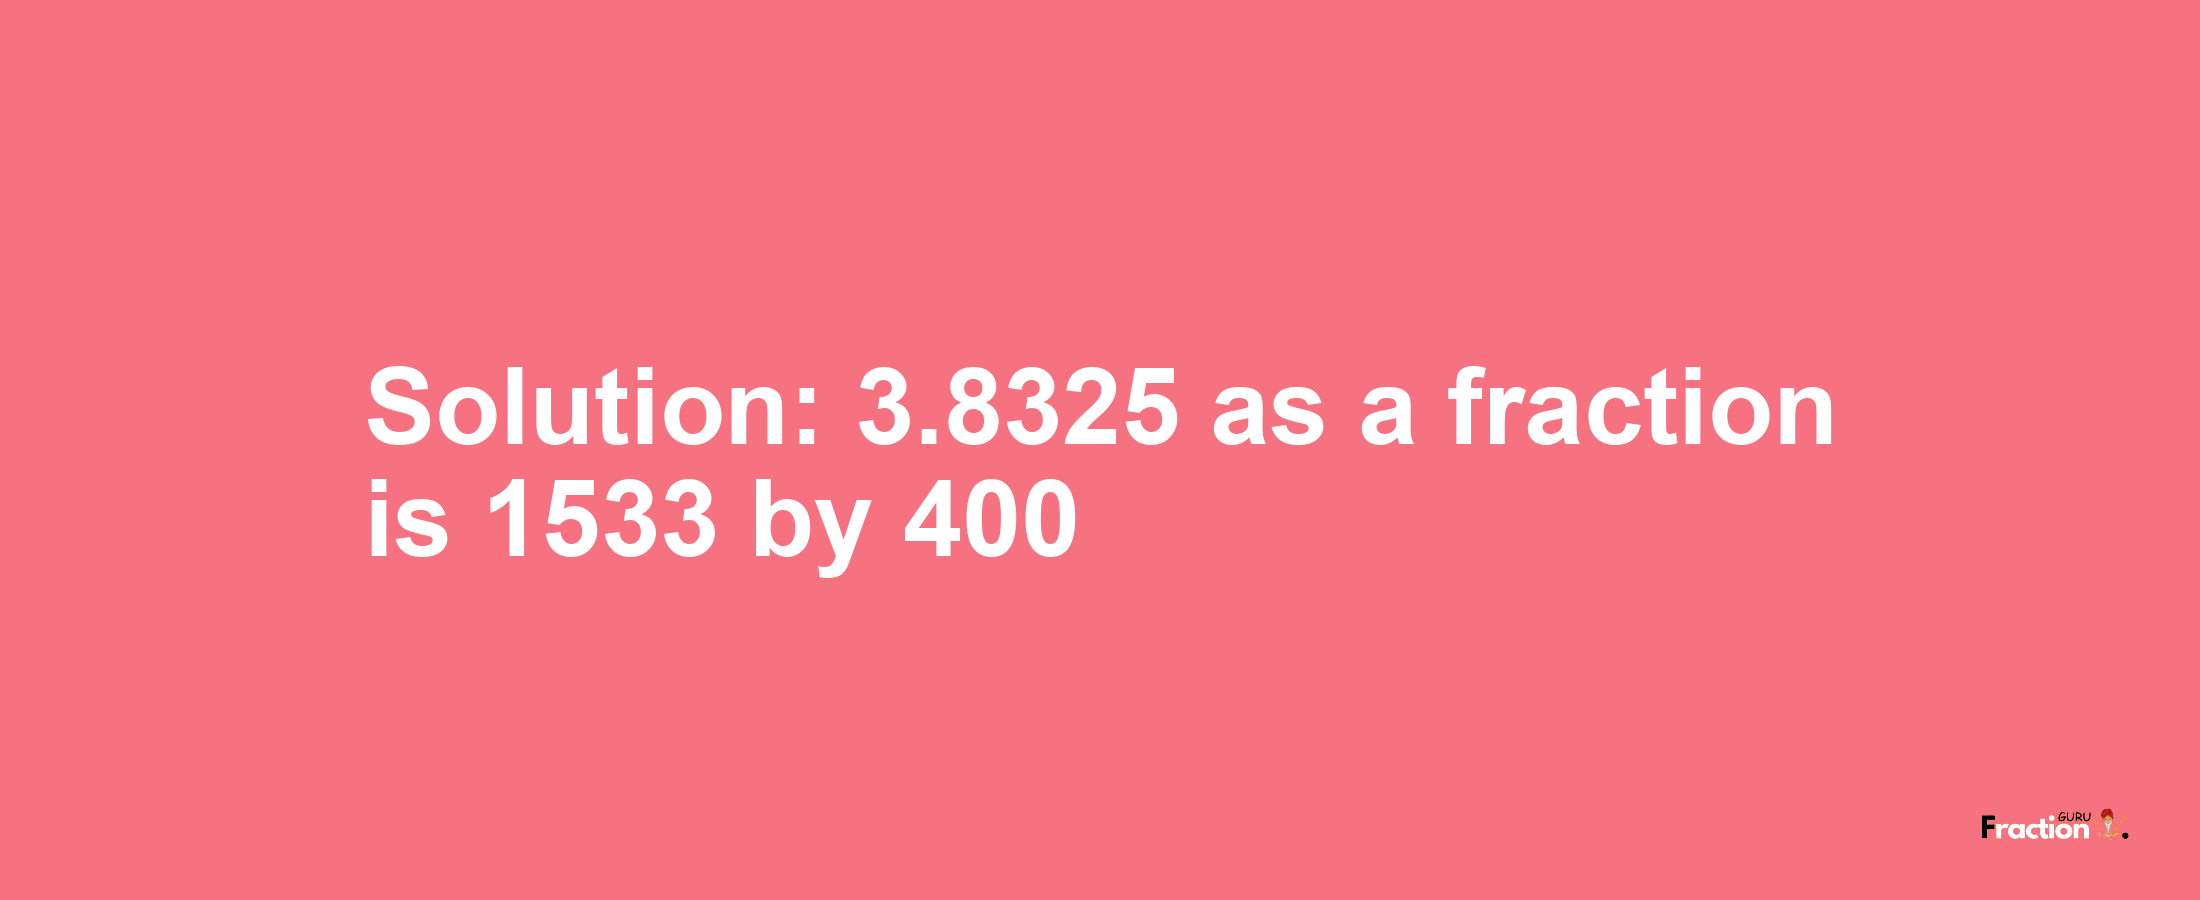 Solution:3.8325 as a fraction is 1533/400